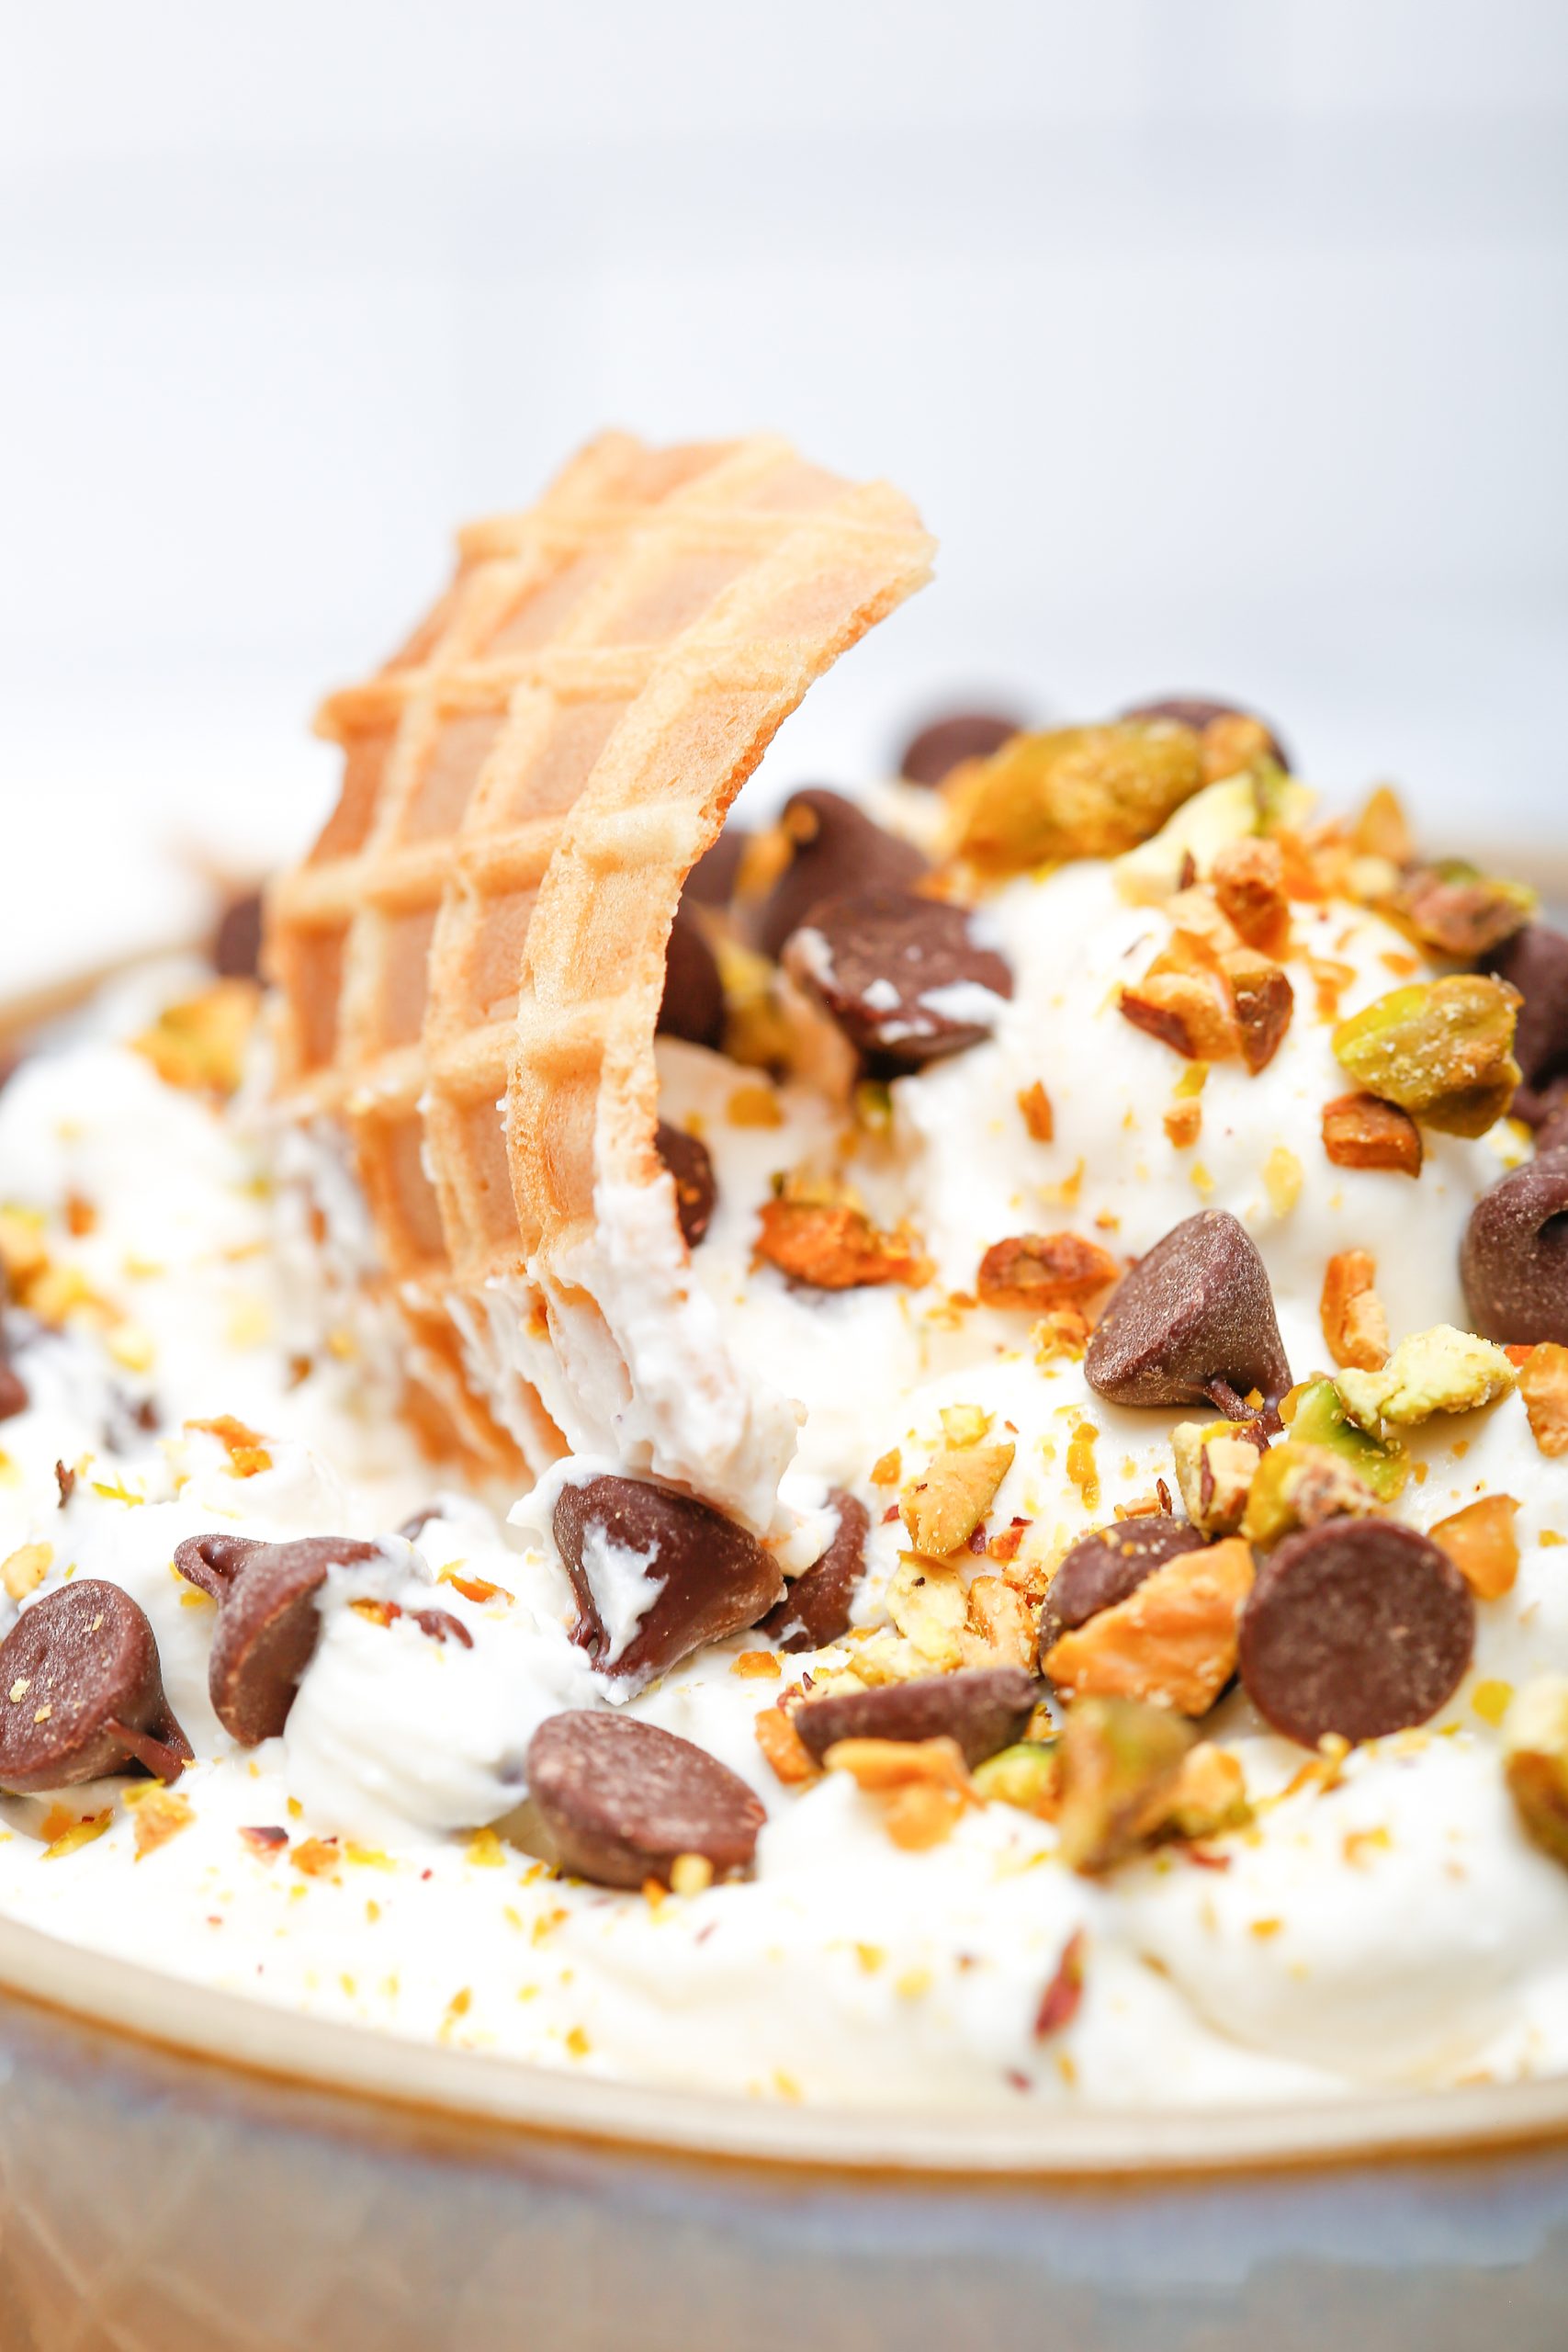 Cannoli dip with pistachios, chocolate chips, and waffle cones.